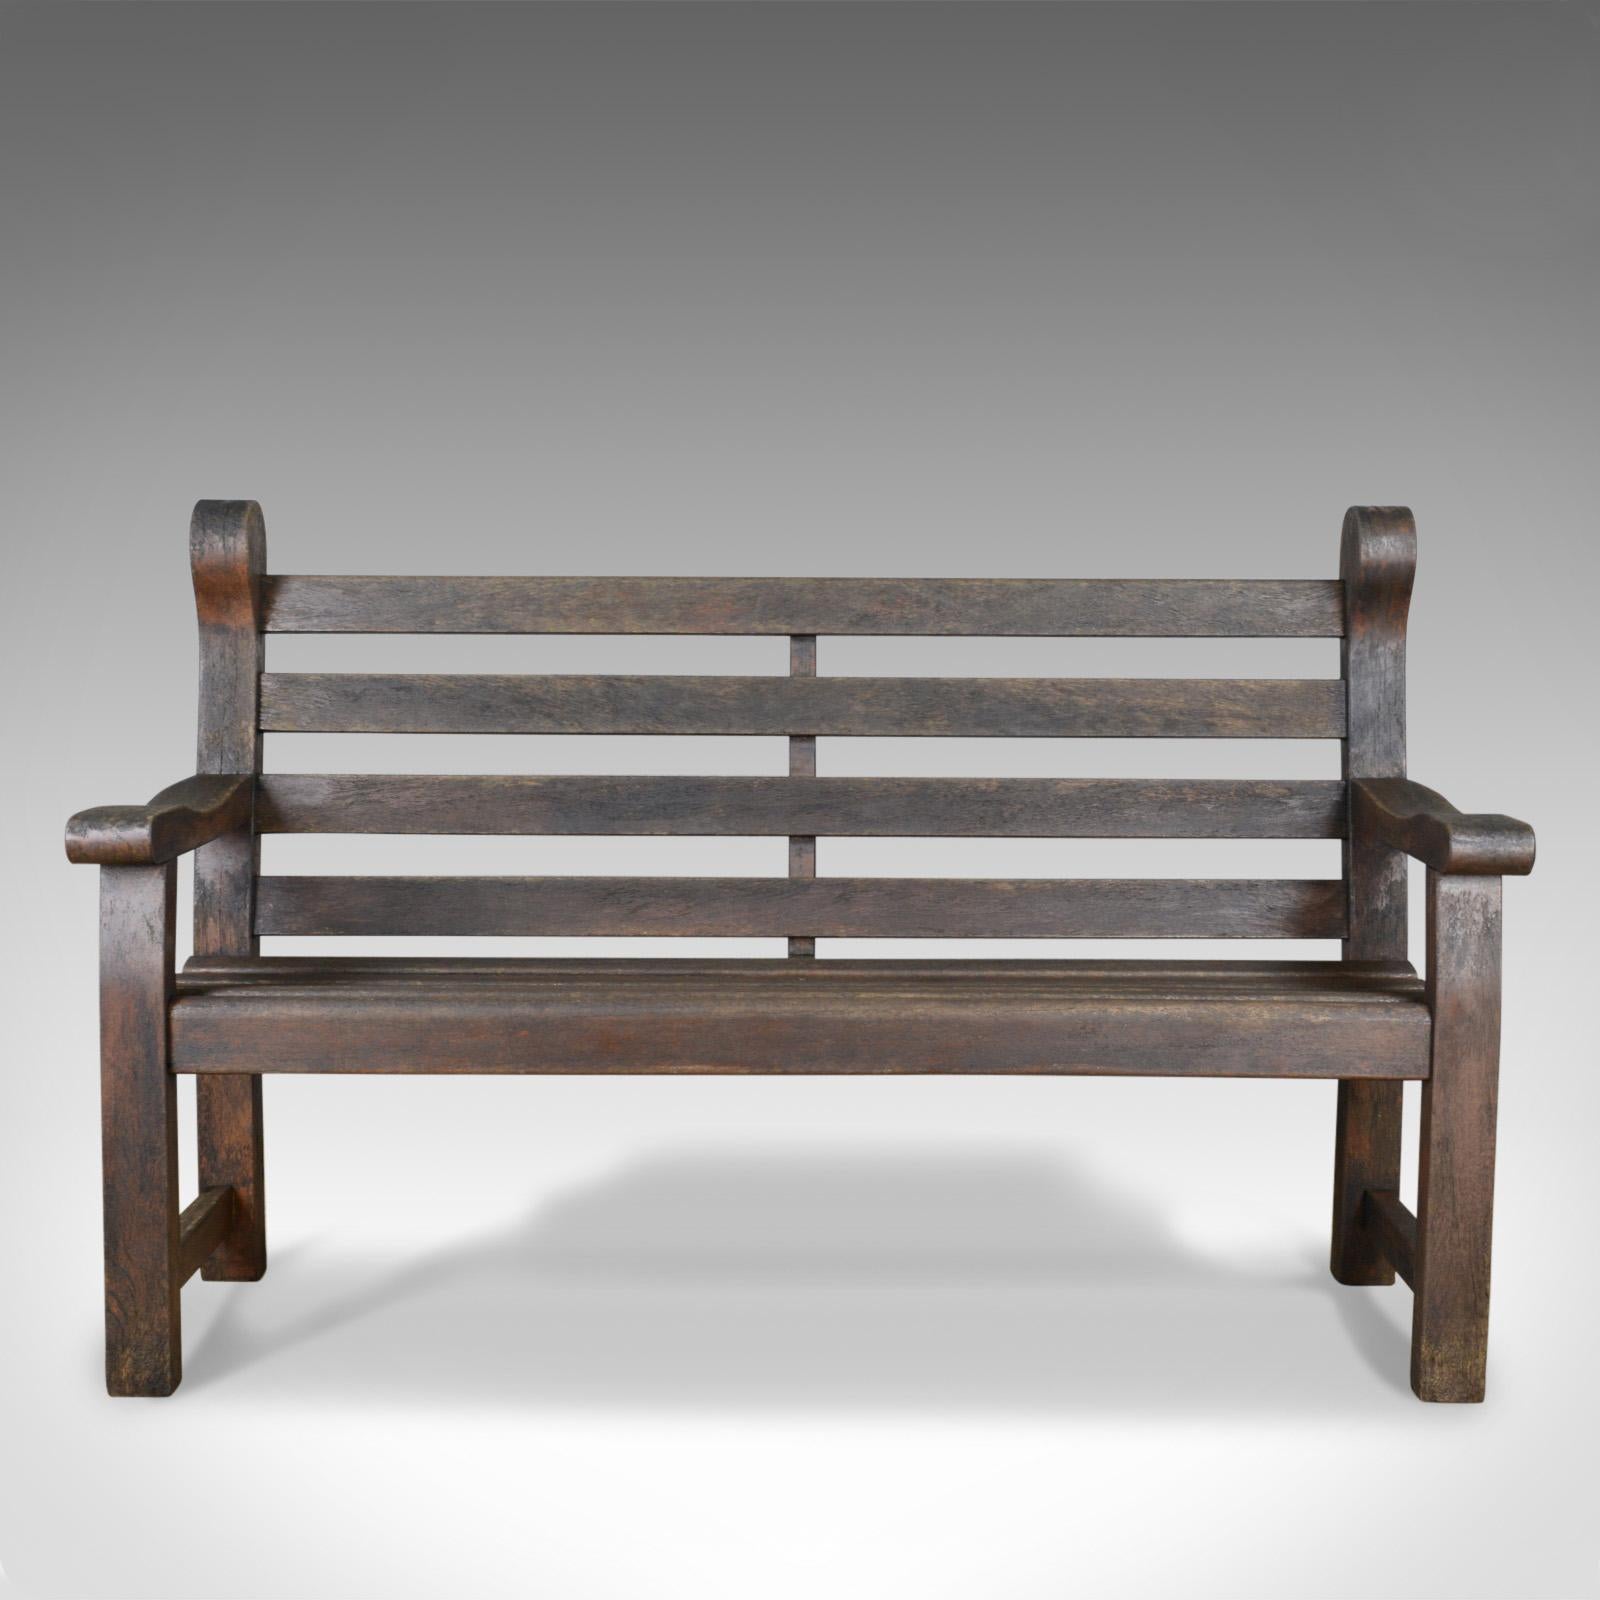 This is a vintage garden bench, an English, hardwood seat dating to the late 20th century seating three or four.

Classic English, slatted design
Handmade in quality hardwood
Pleasingly weathered with a desirable aged patina

Broad four plank